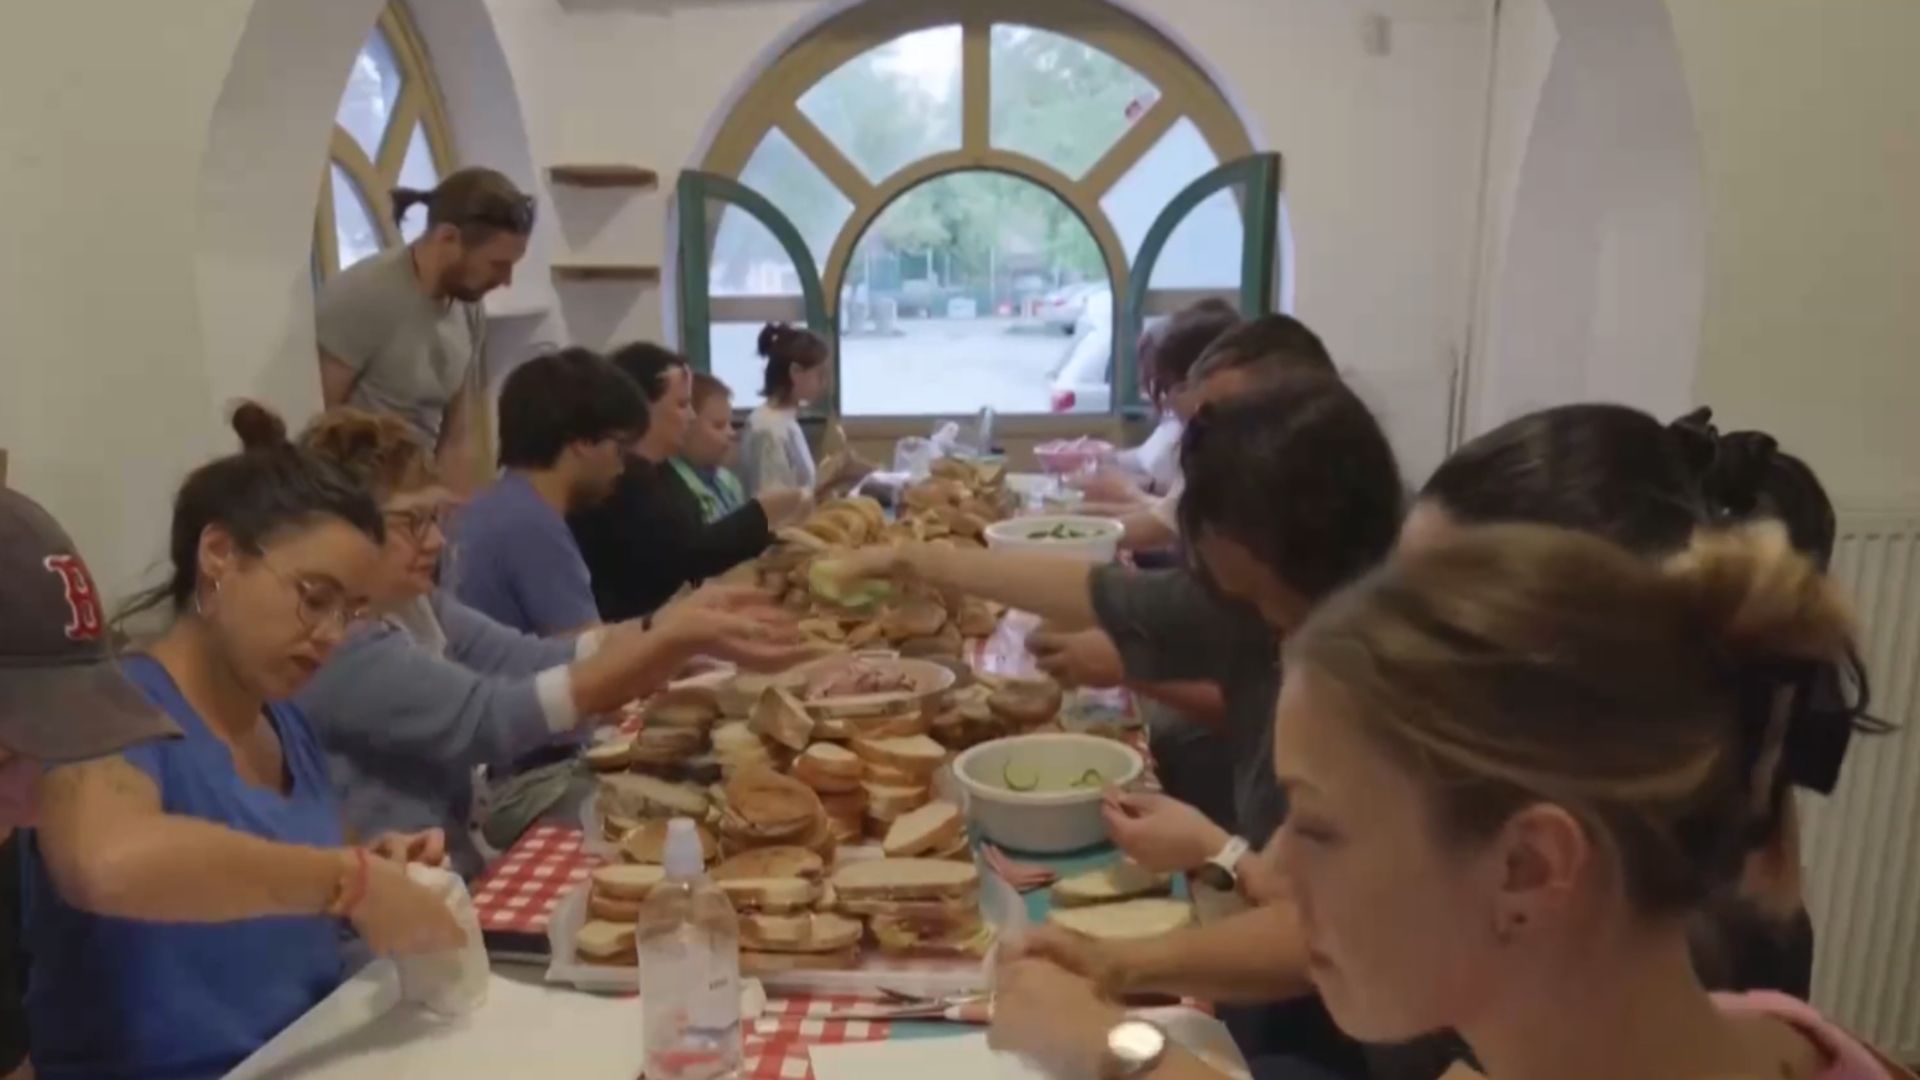 Volunteers distribute hundreds of sandwiches to homeless individuals. /CGTN